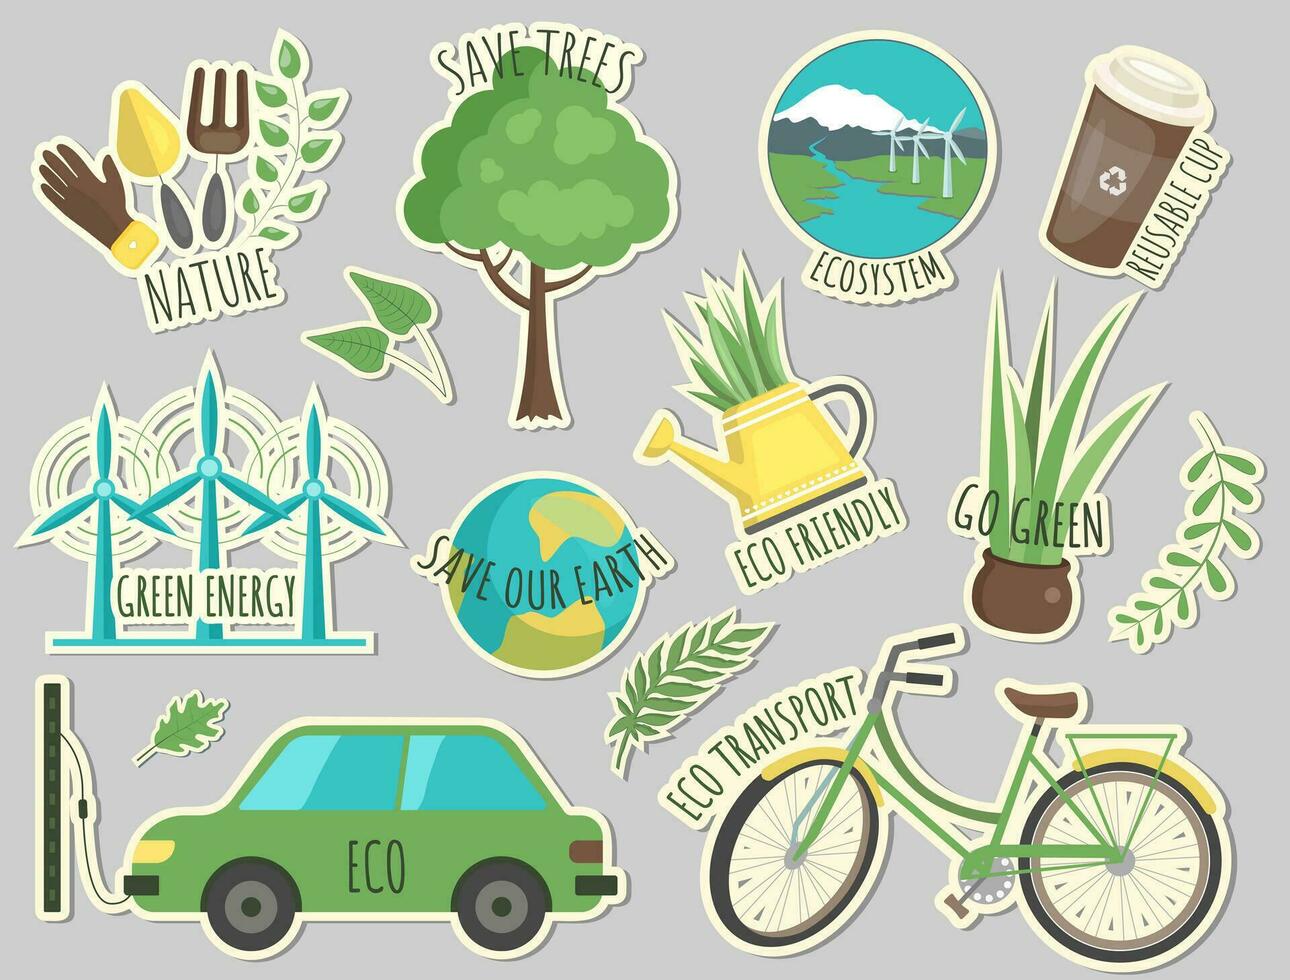 Ecology stickers. Collection of ecology stickers with slogans. Love our earth, save energy. Eco labels. Care for nature vector